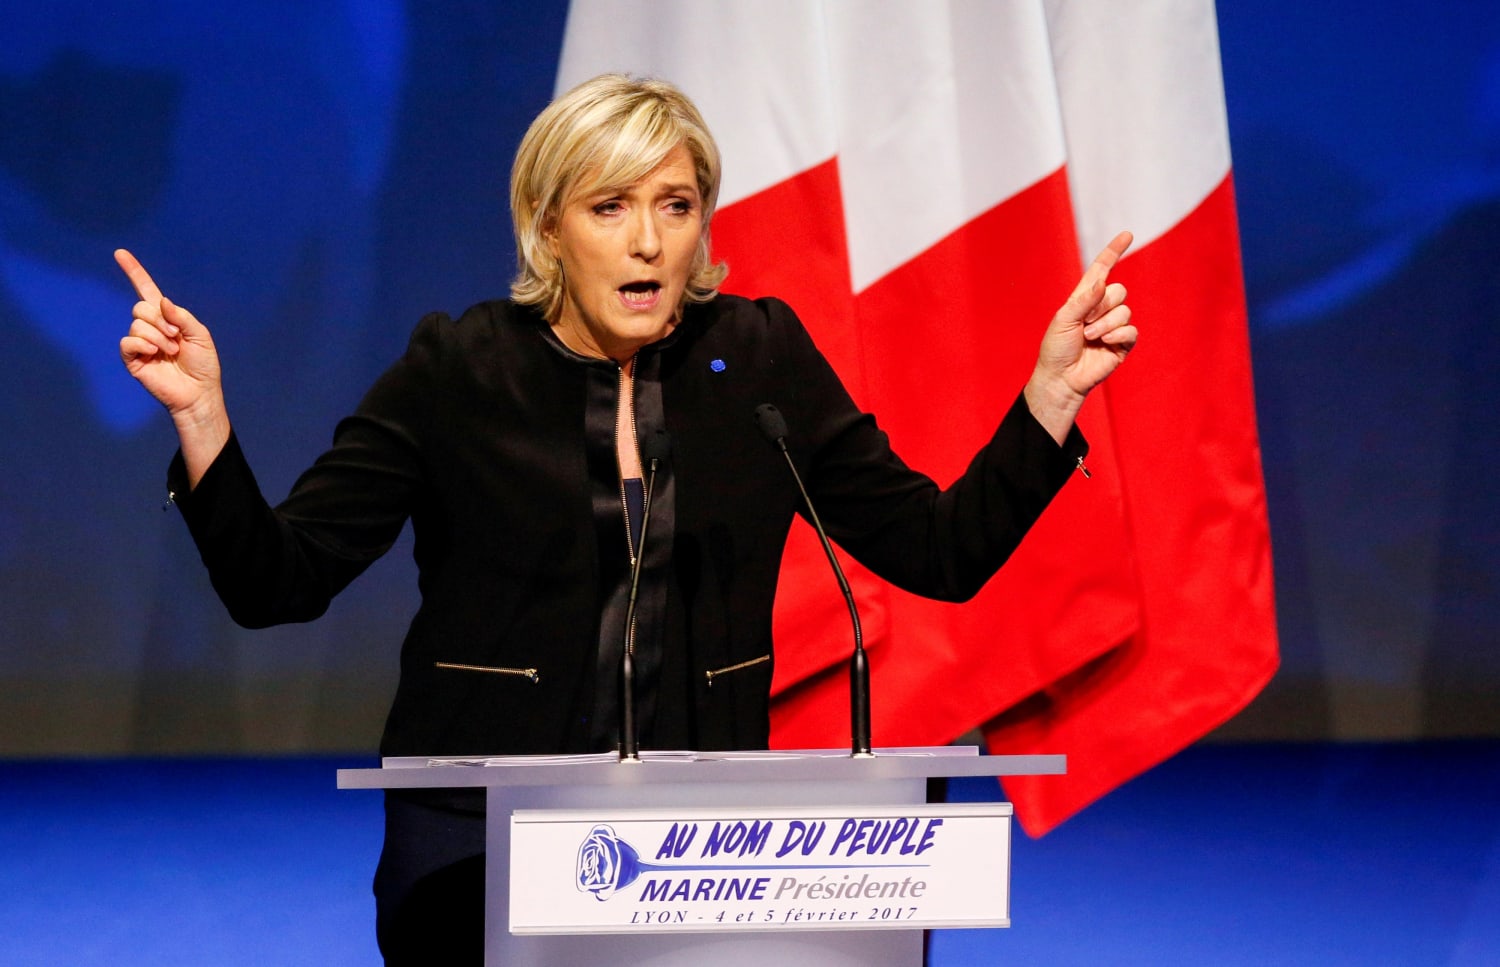 Far-right Le Pen now second most-liked French politician, poll